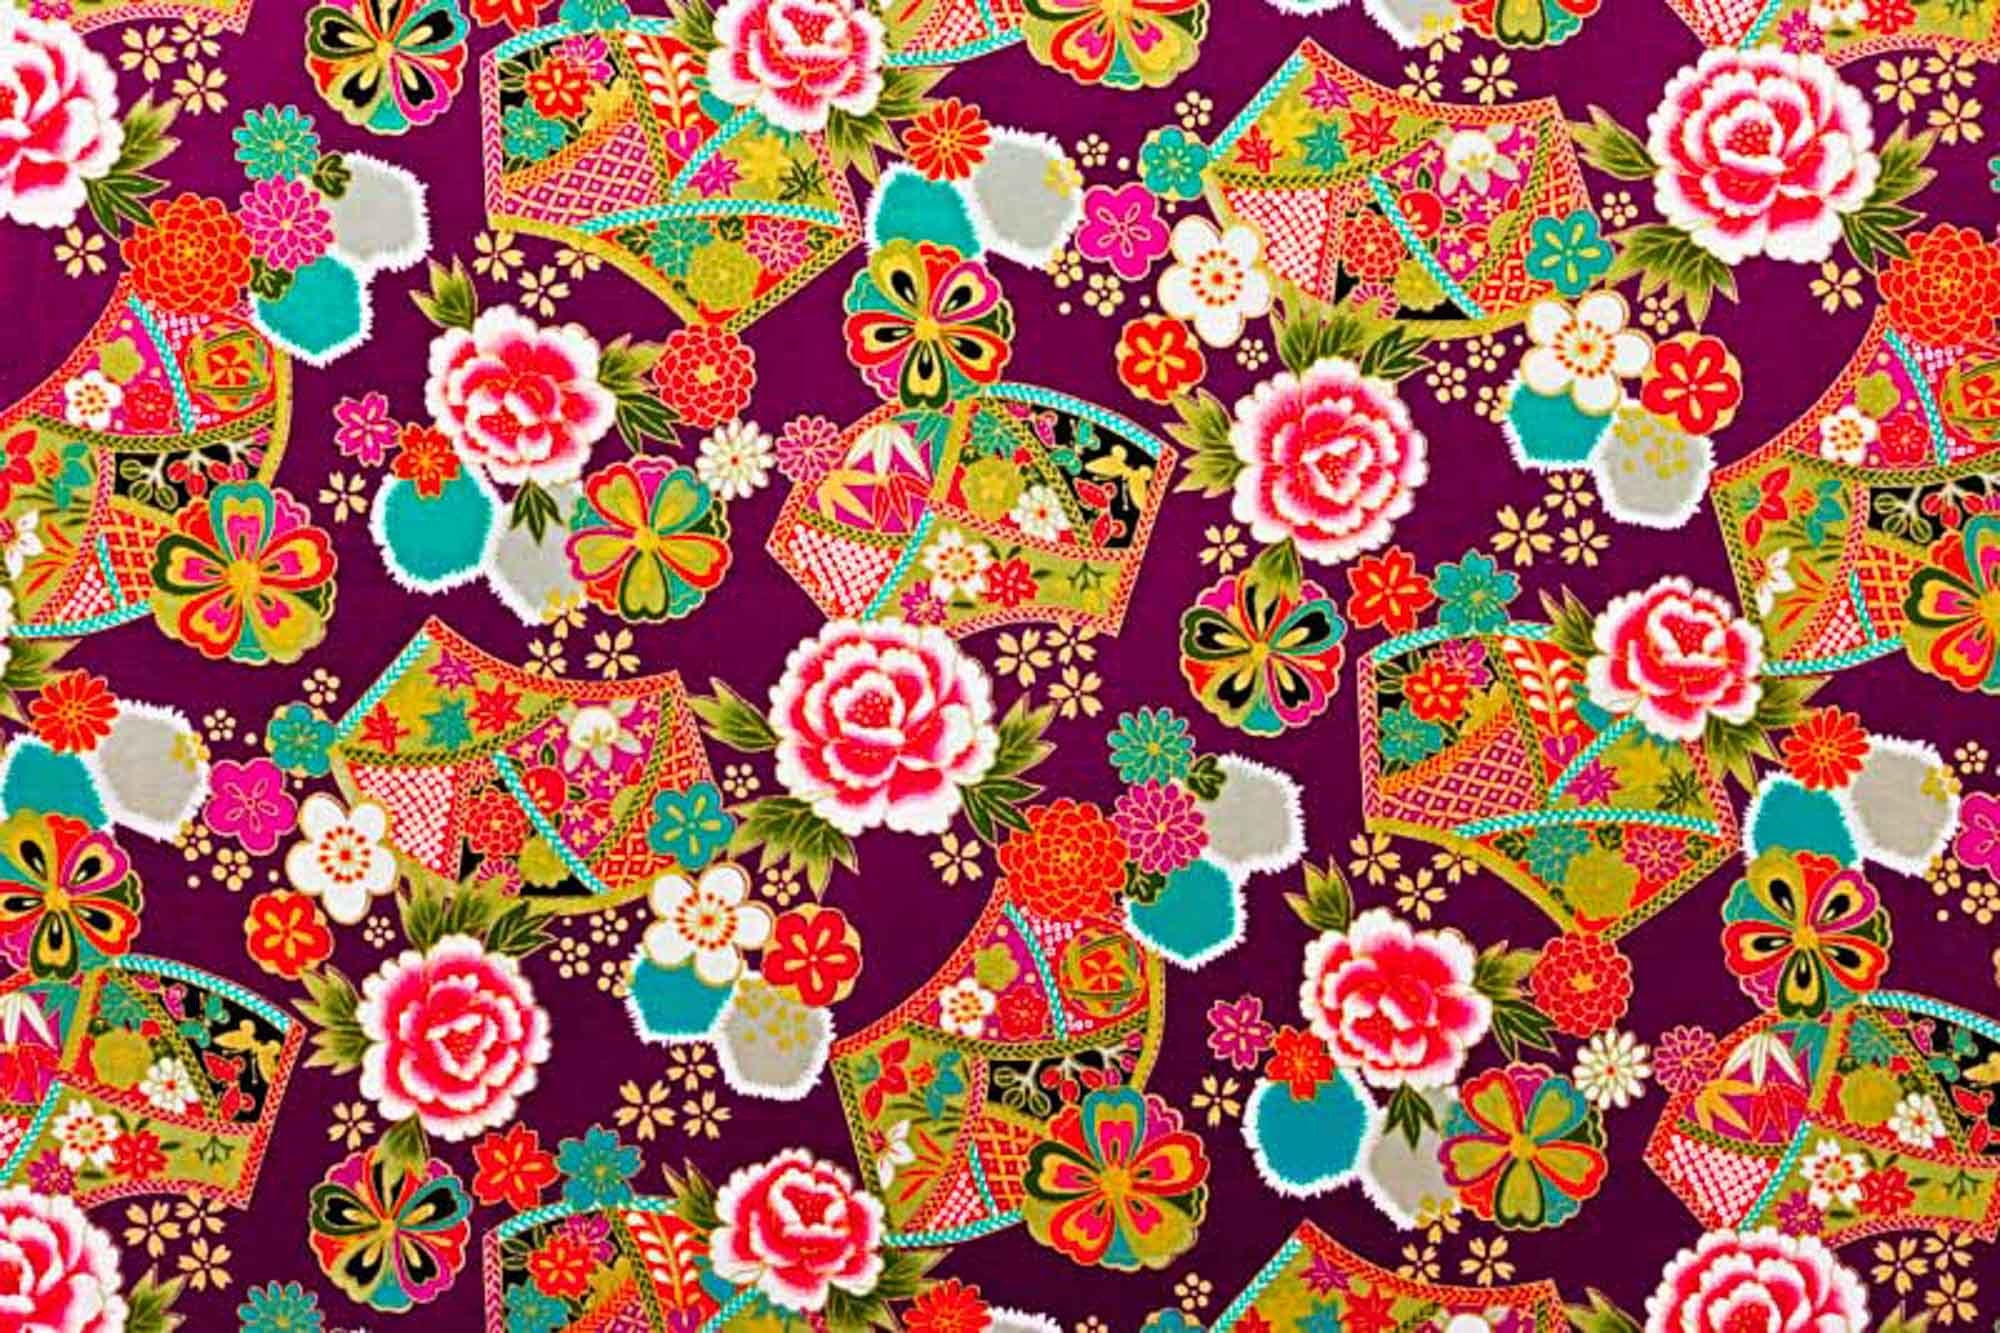 Piece for purple floral fabric fan pattern fabric camellia | Etsy